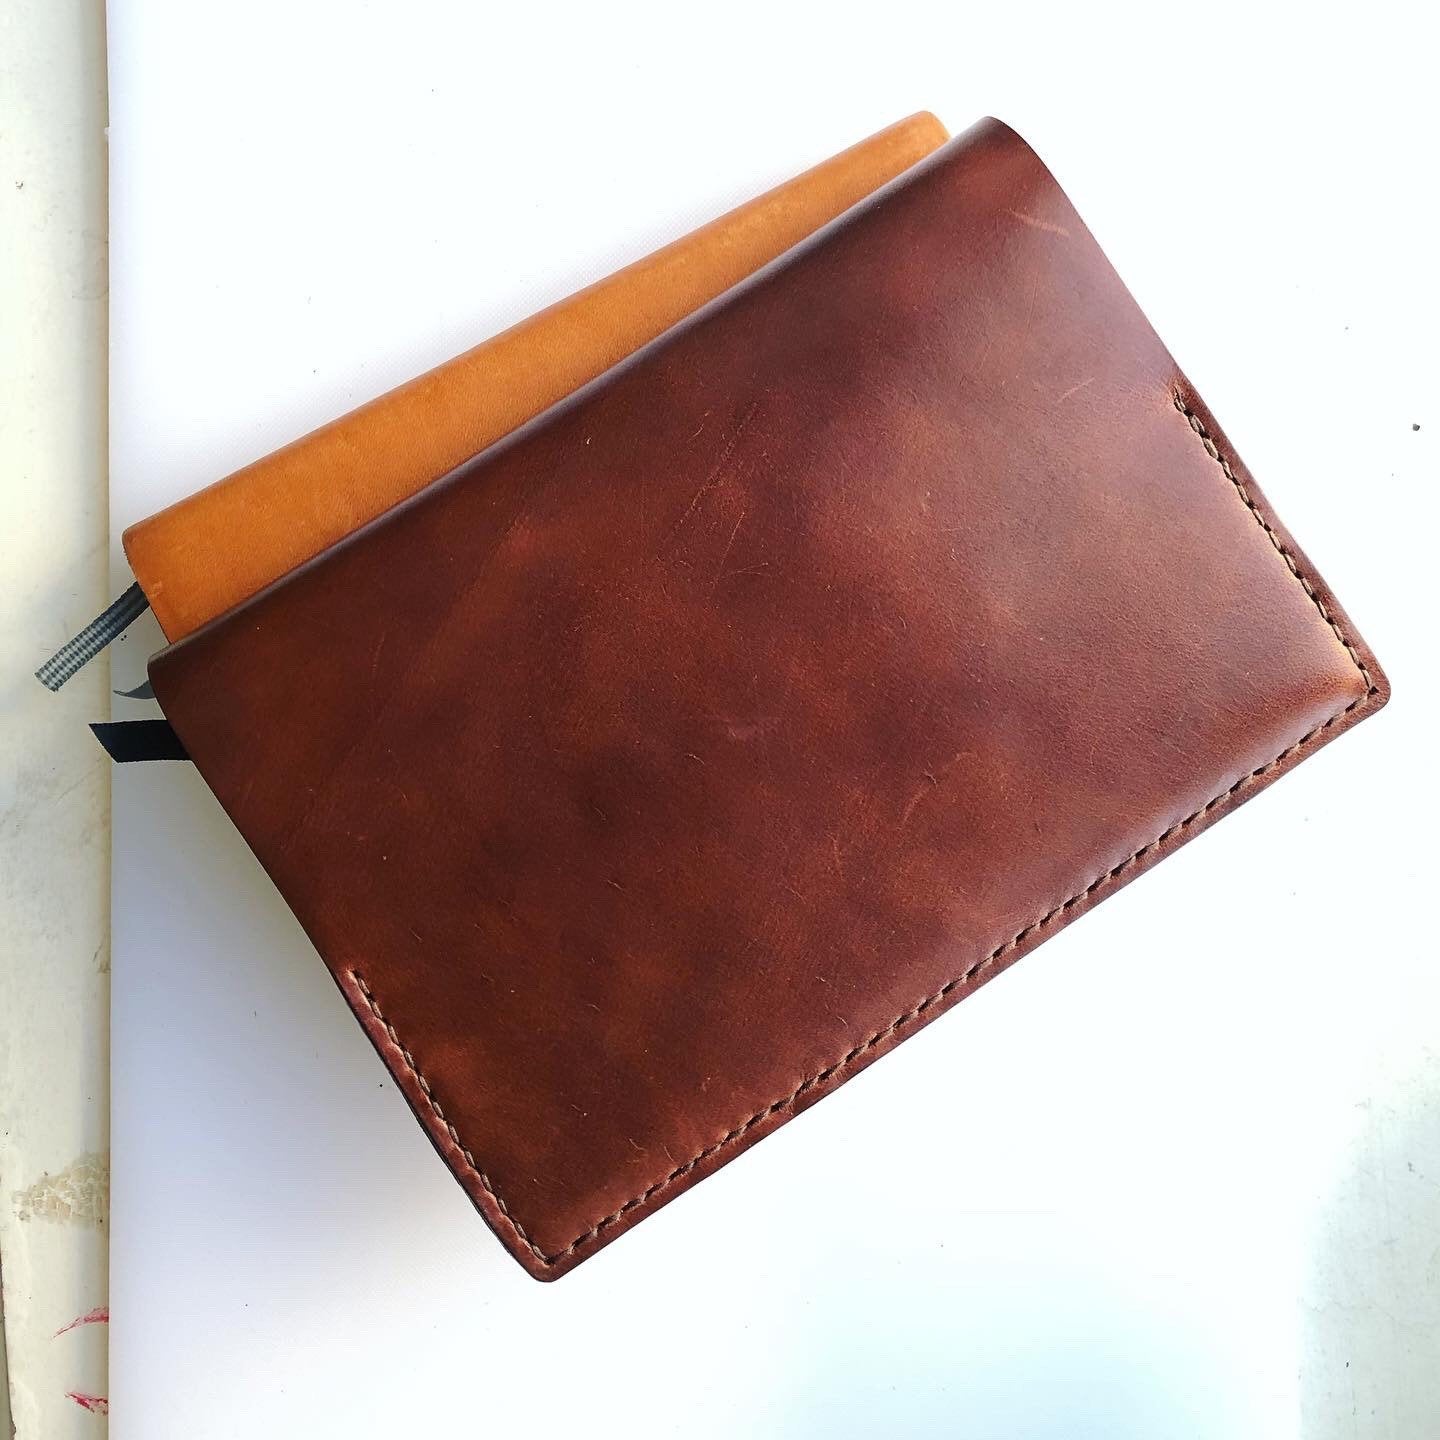 Personalised leather moleskine travel journal A5 size with